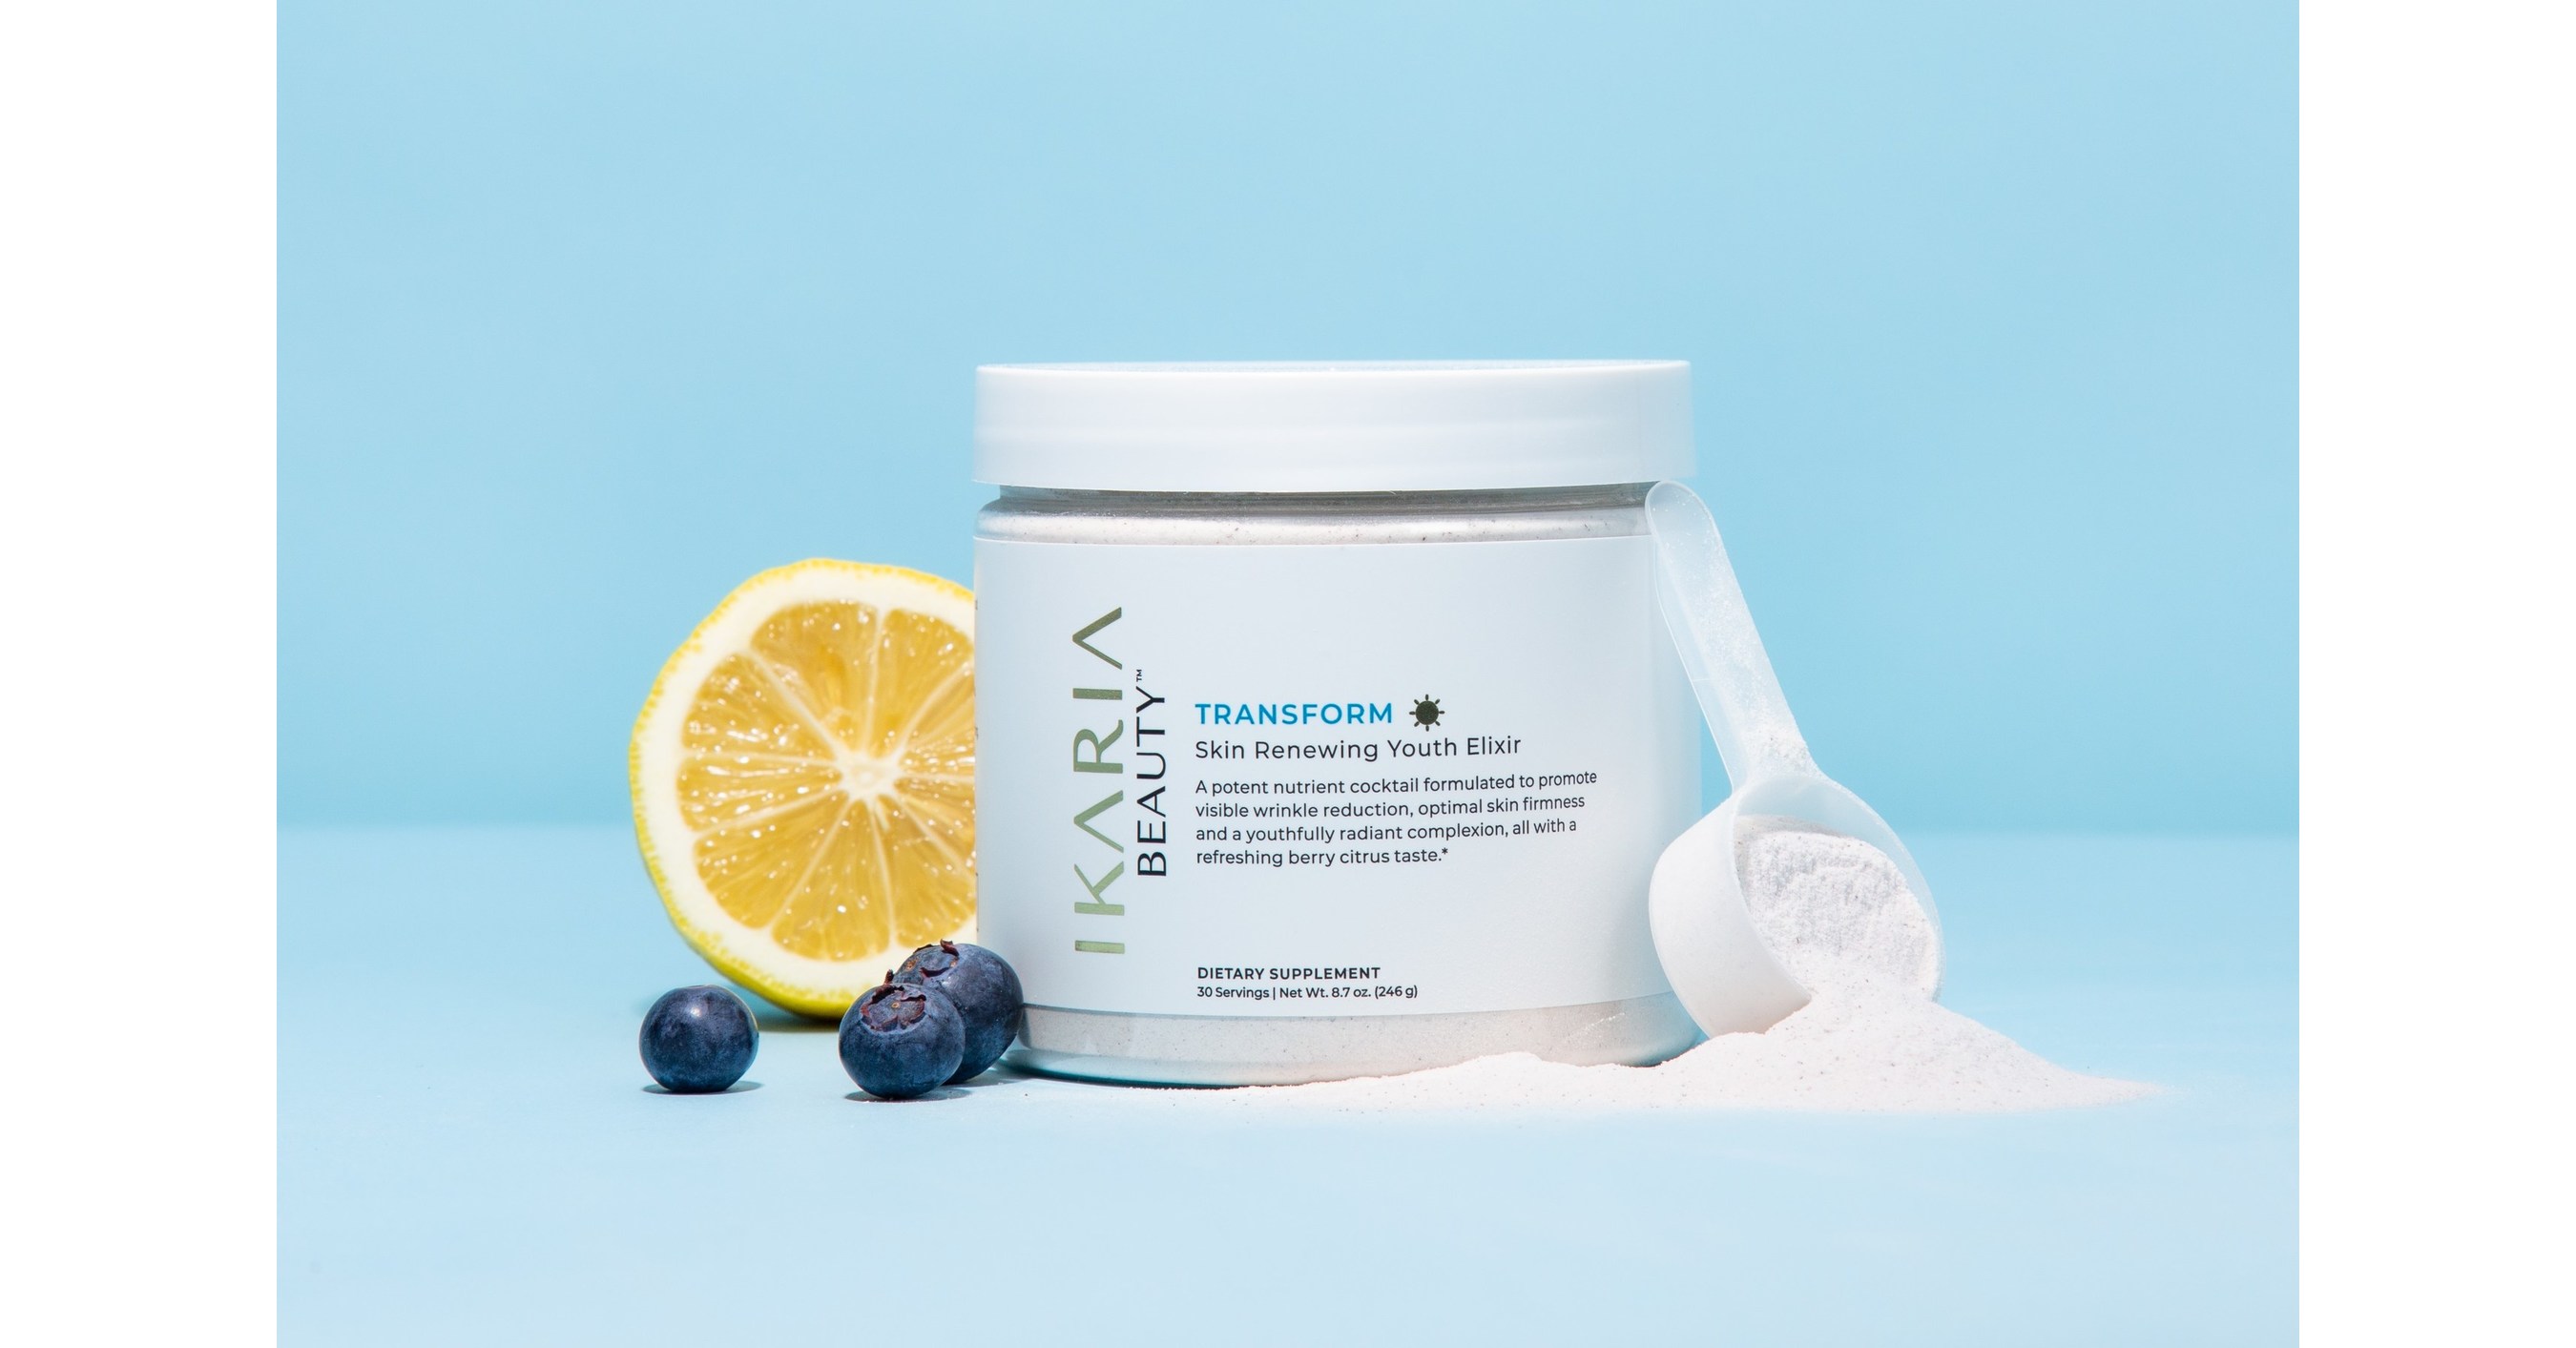 Ikaria Beauty TRANSFORM Skin Renewing Youth Elixir from Debbie Matenopolous  is One of Her Best Tips for Summer Skin Hydration